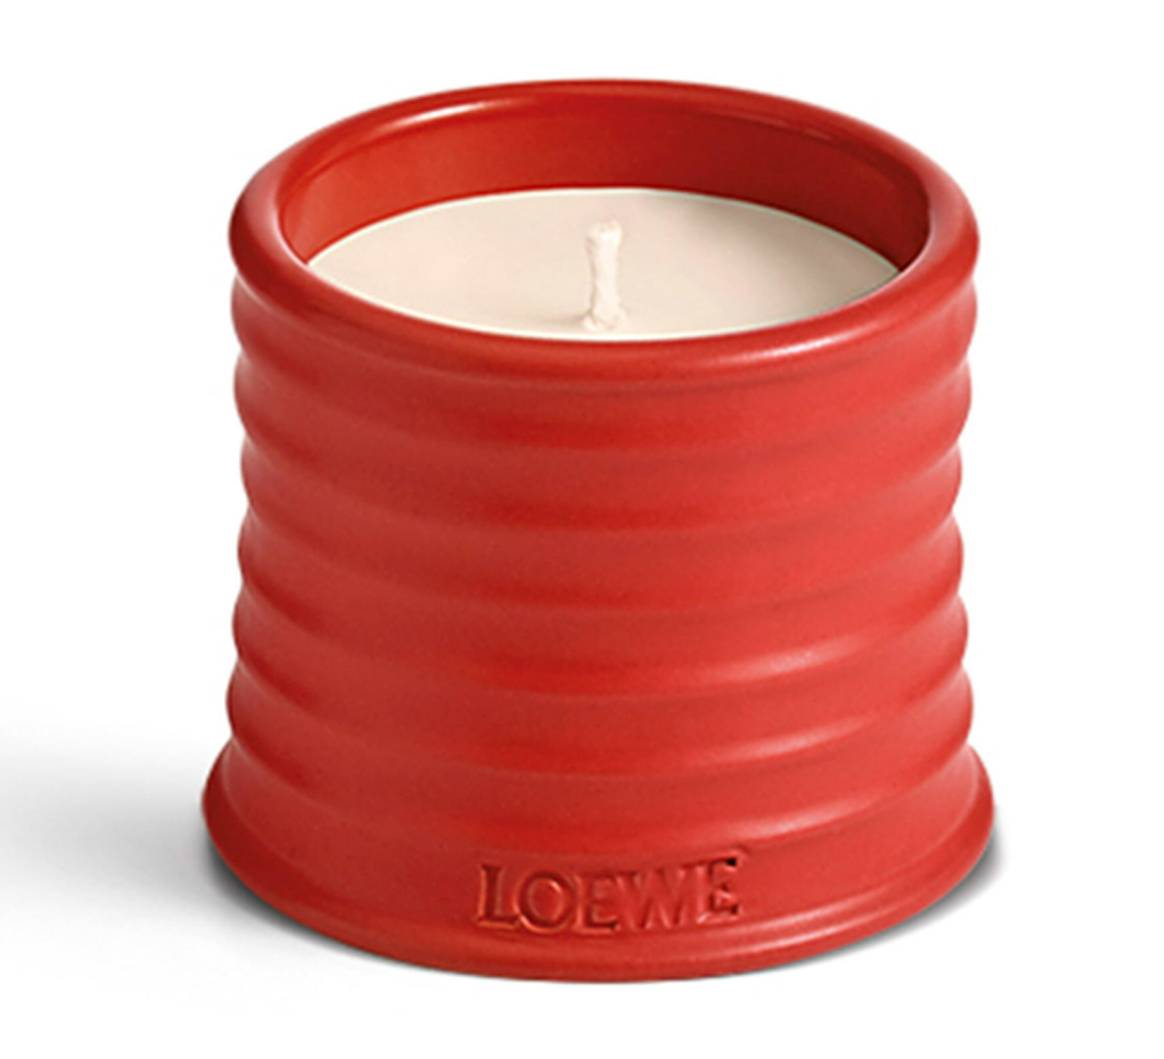 Loewe tomato scented candle 